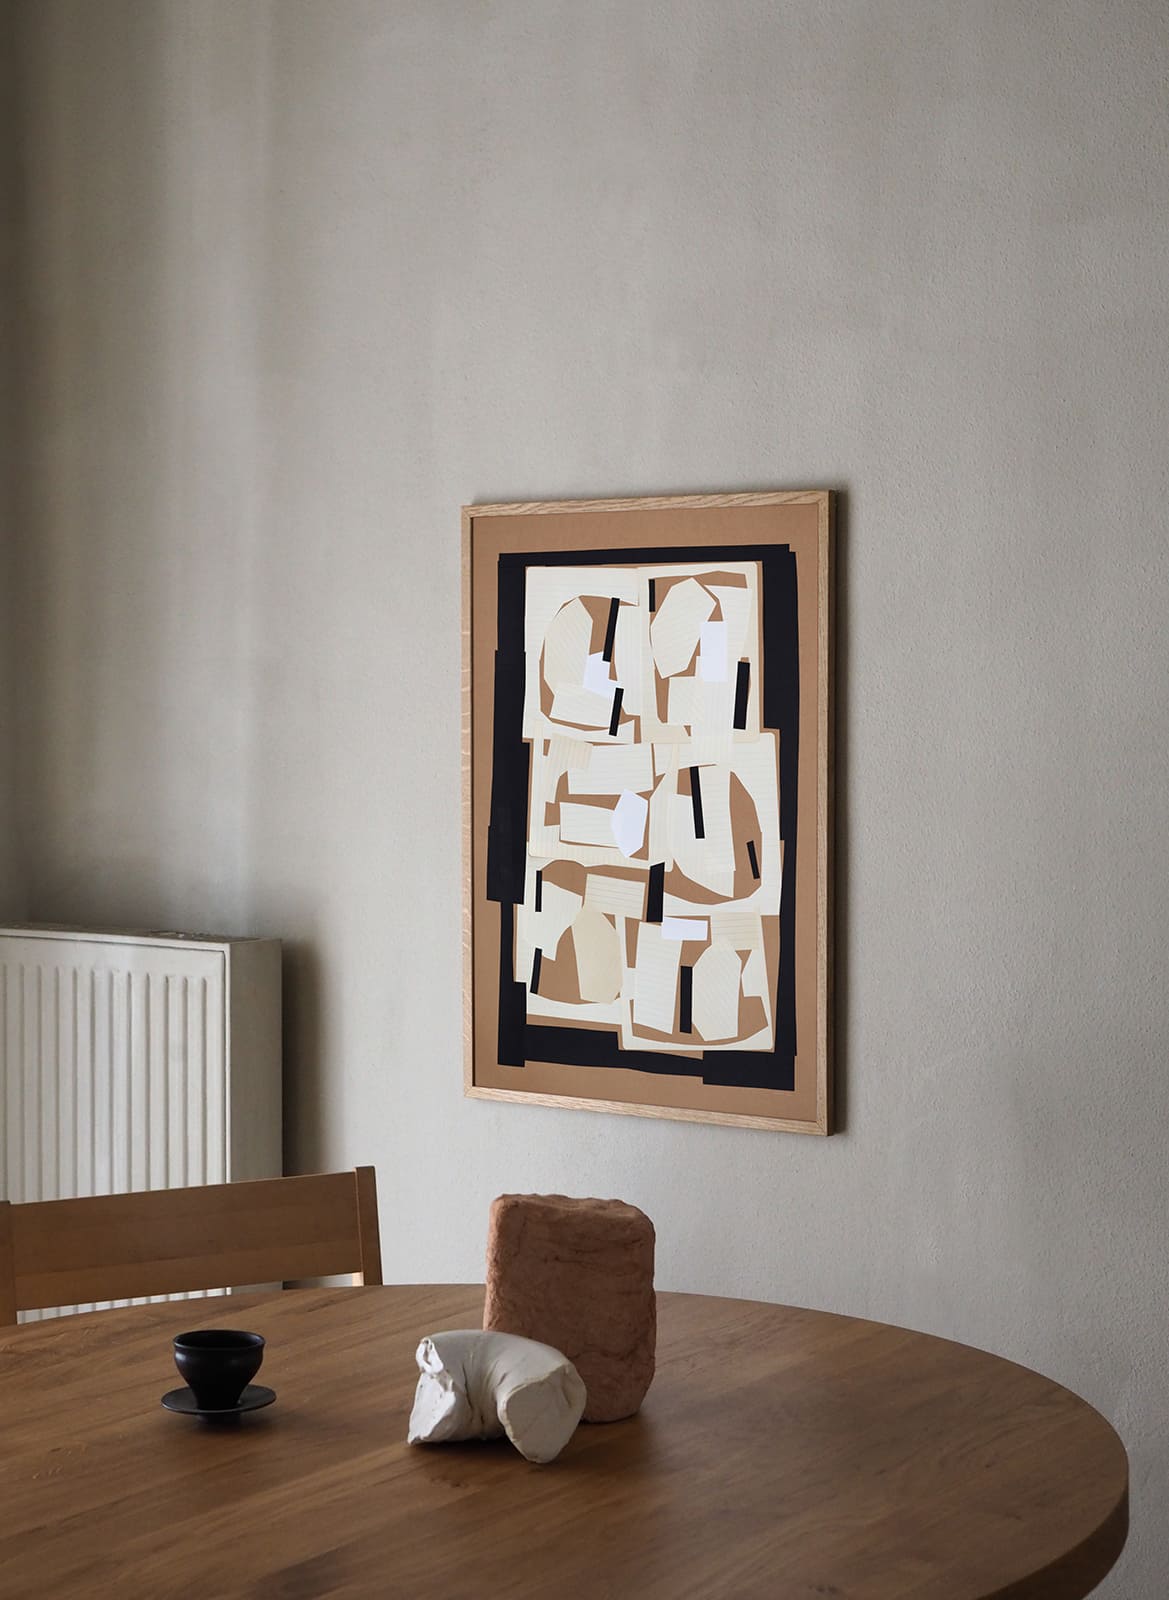  Framed minimalistic poster hanging above dining table by Atelier Cph